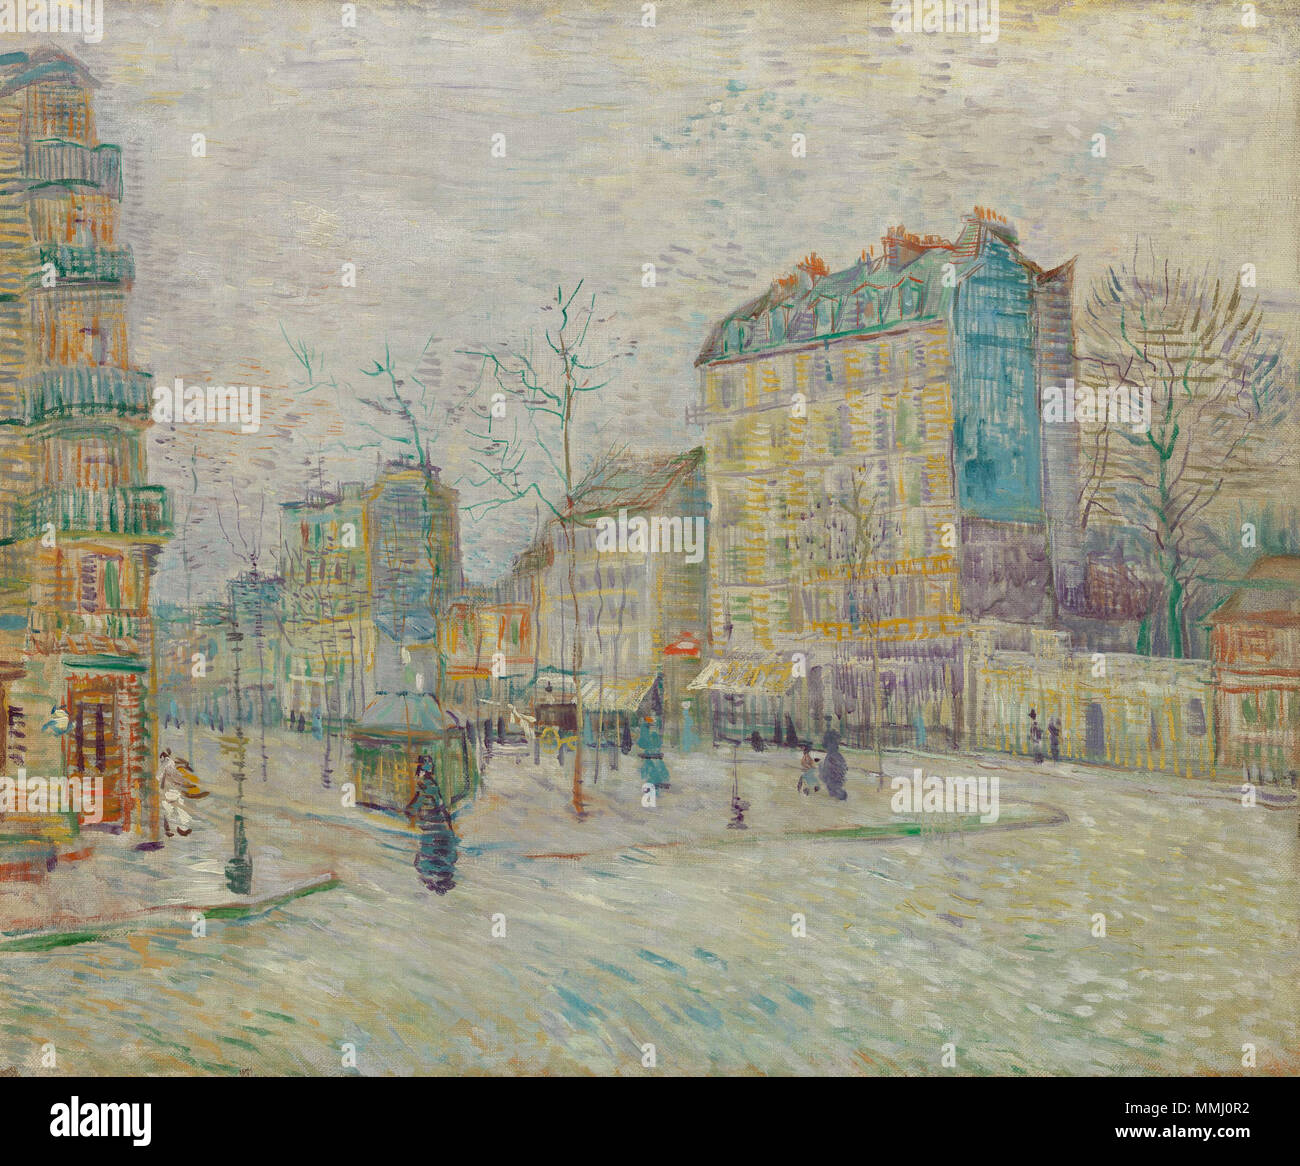 English: Painting by Vincent van Gogh, 1887 Nederlands: Schilderij van  Vincent van Gogh, 1887 English: Boulevard de Clichy Nederlands: Boulevard  de Clichy . 1887. Boulevard de Clichy - s0094V1962 - Van Gogh Museum Stock  Photo - Alamy